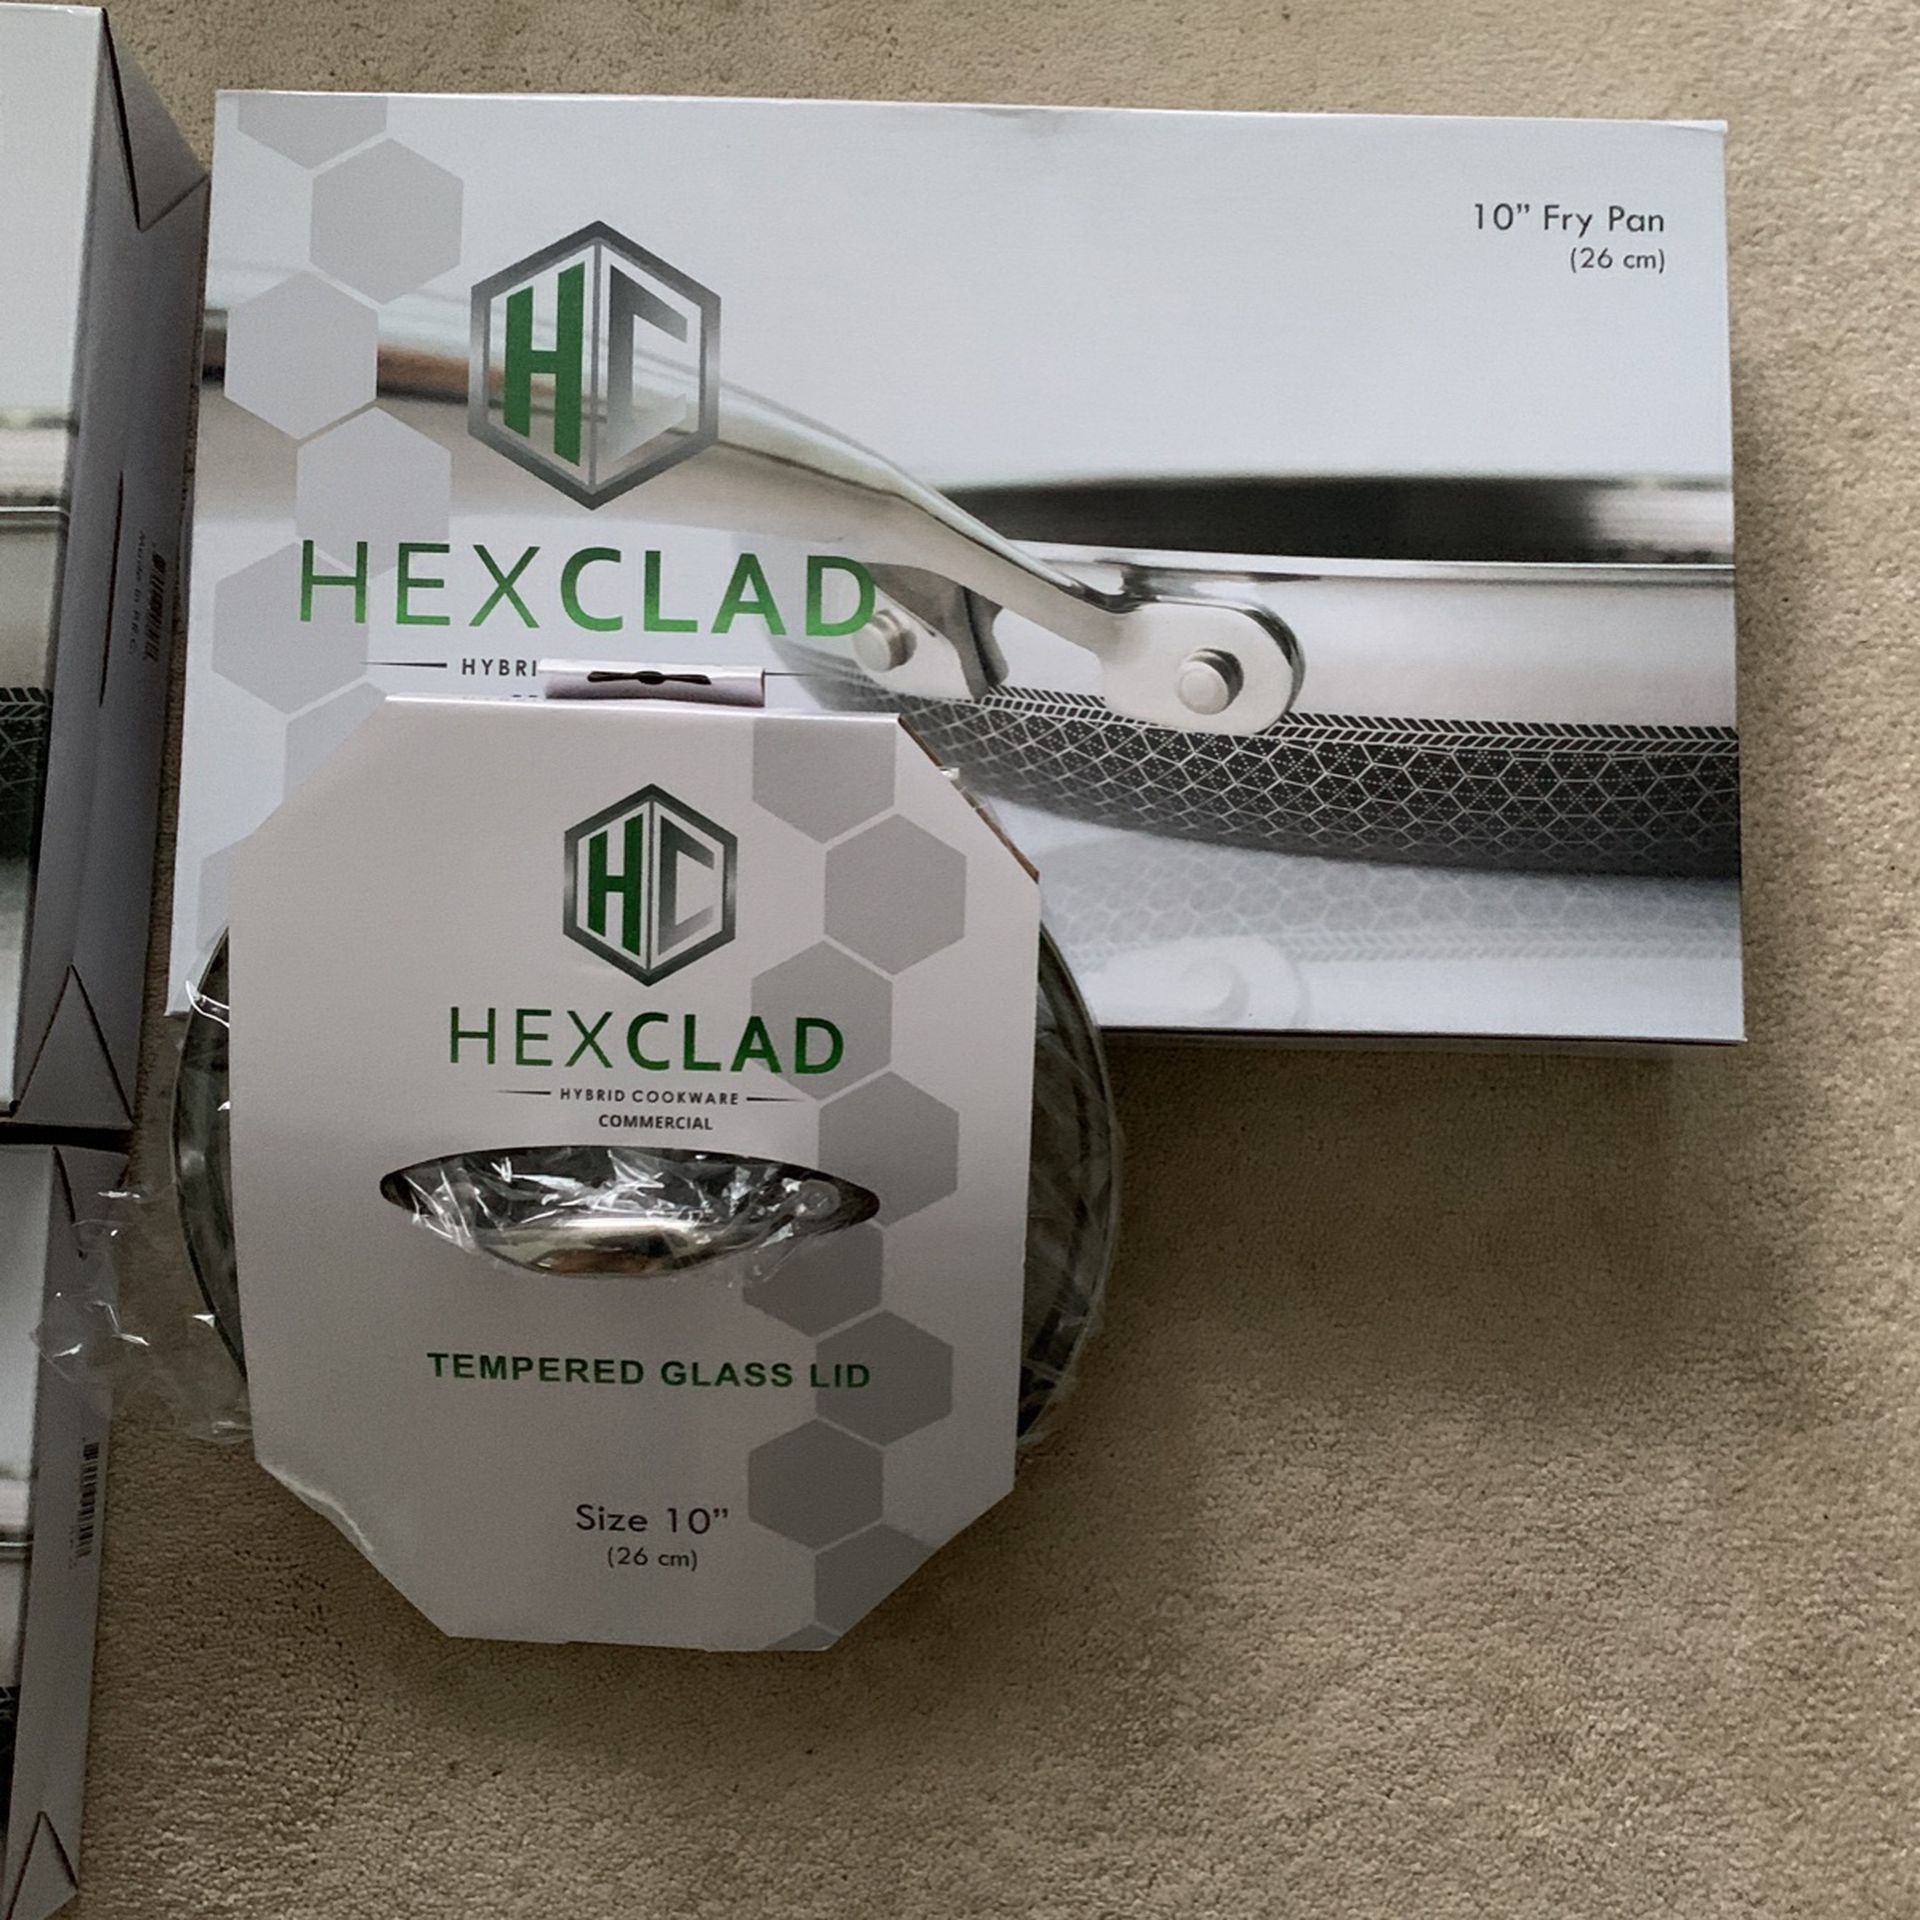 HexClad Hybrid Nonstick 8-Inch Fry Pan with Tempered Glass Lid